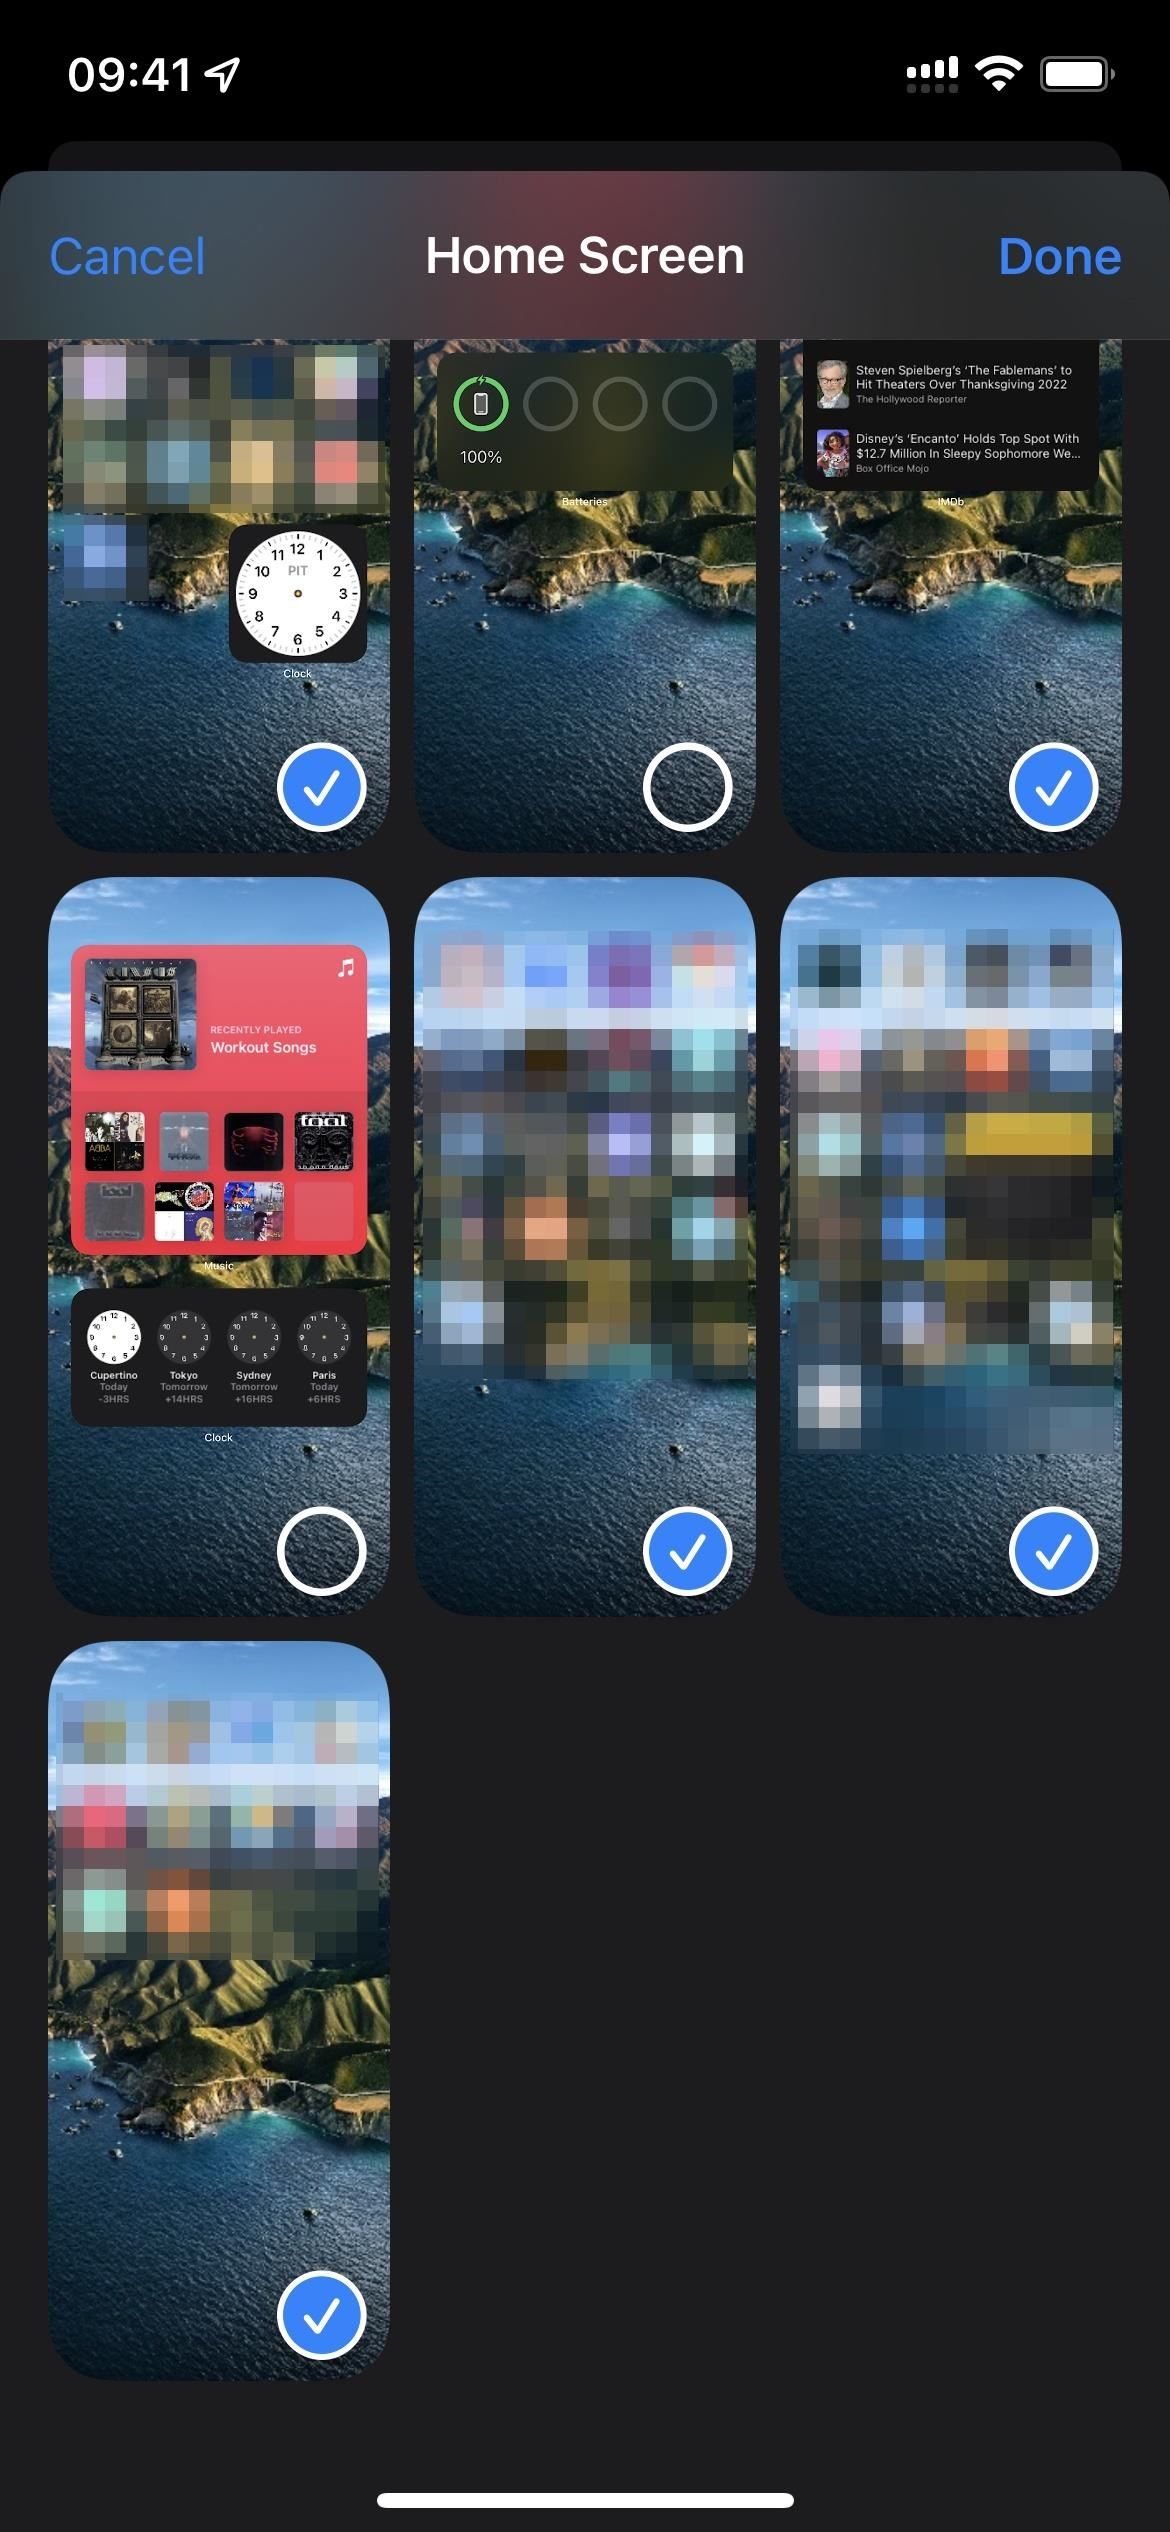 Everything You Need to Know About Your iPhone's Focus Feature — From Creating and Editing Focuses to Automating Them